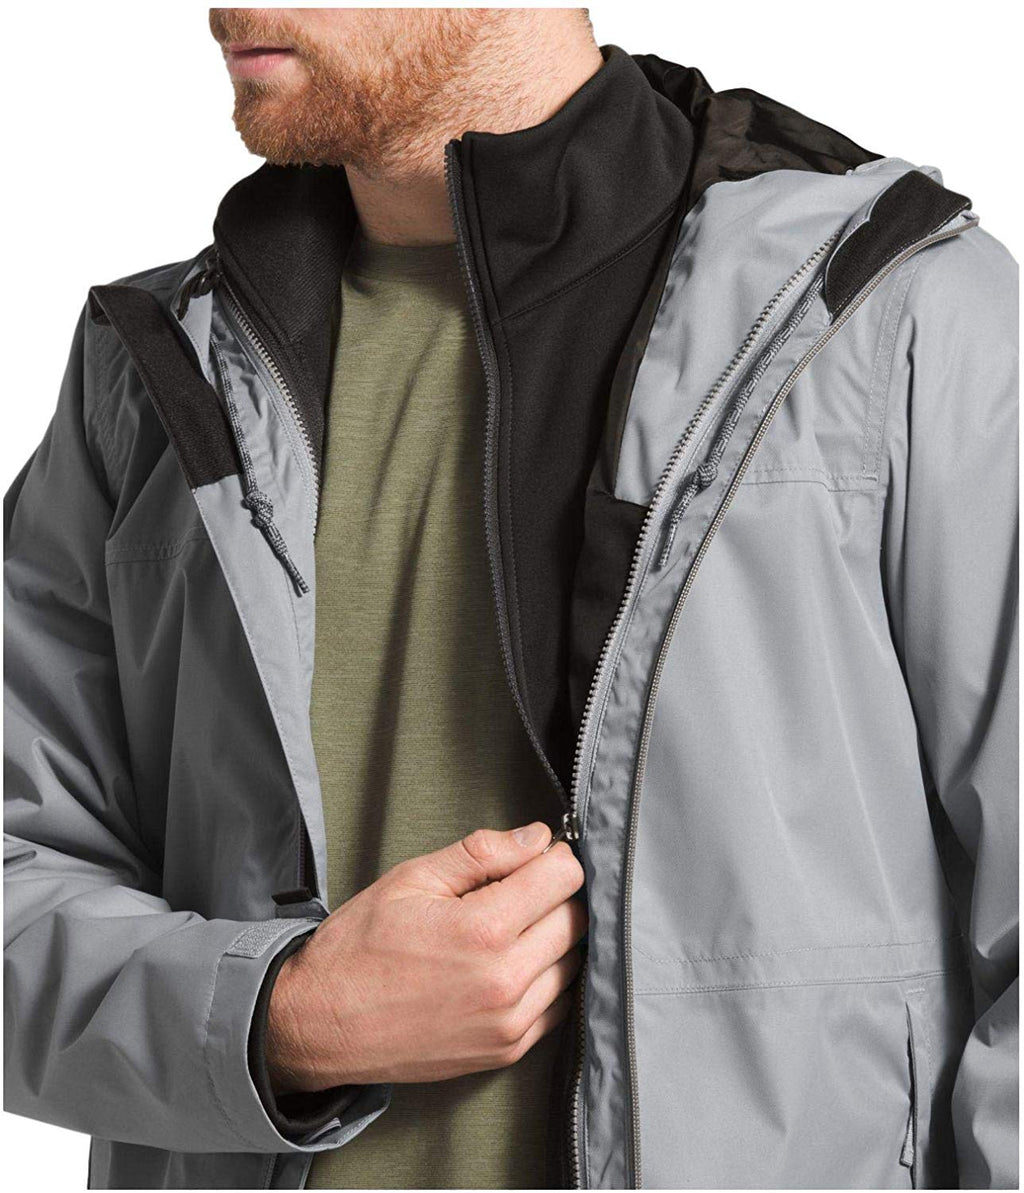 The North Face Arrowood Triclimate